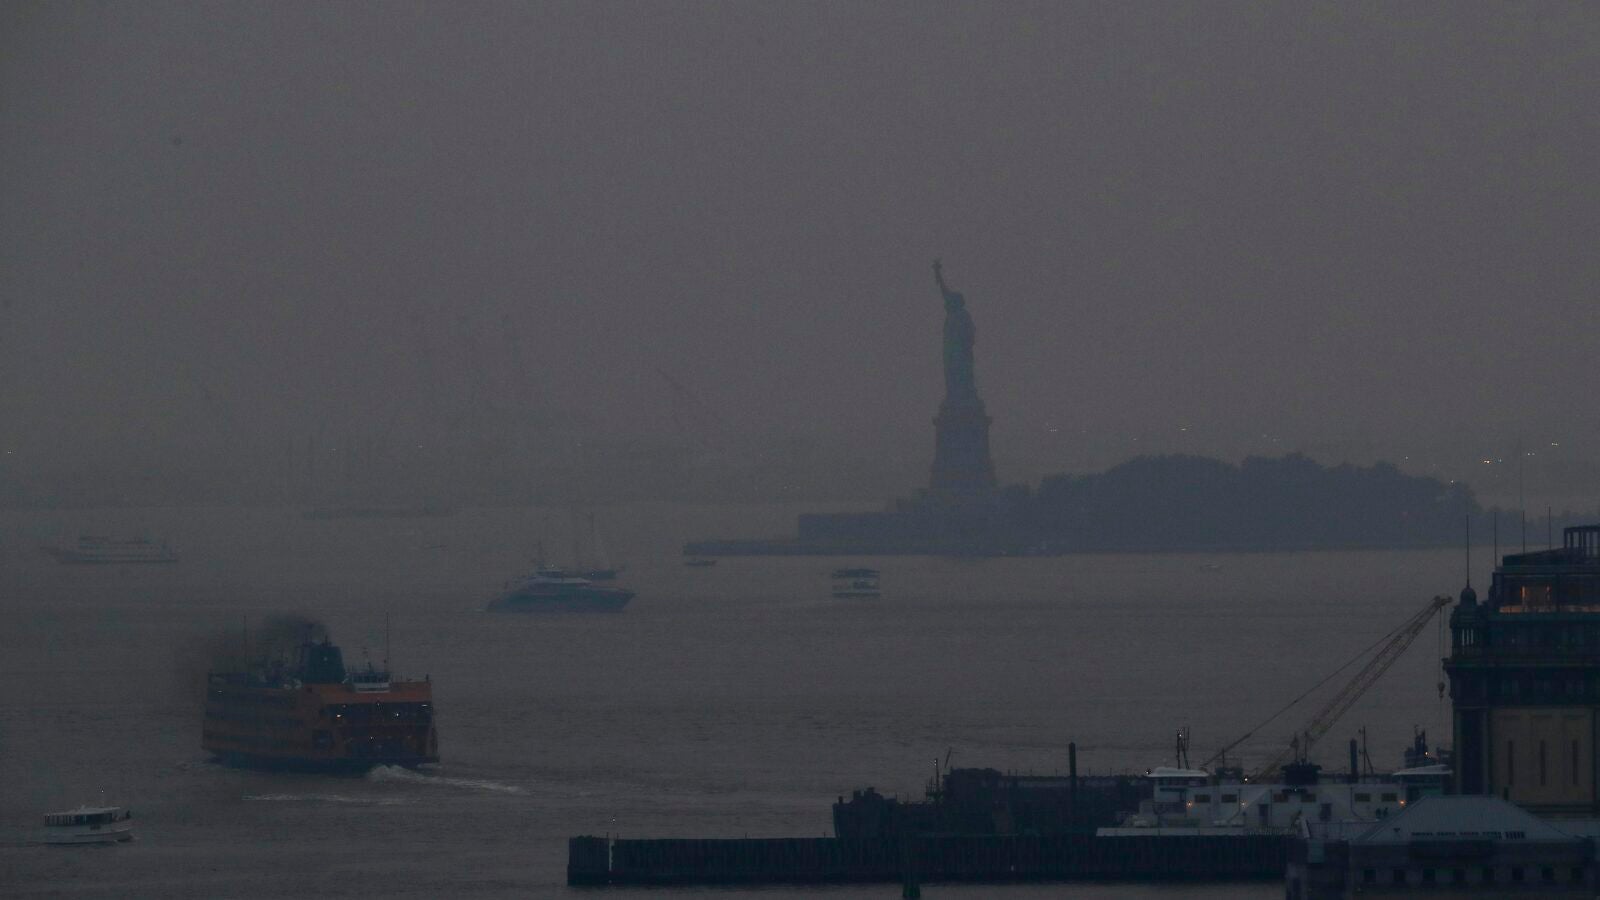 Statue of Liberty shrouded in smoke from wildfires on West Coast.